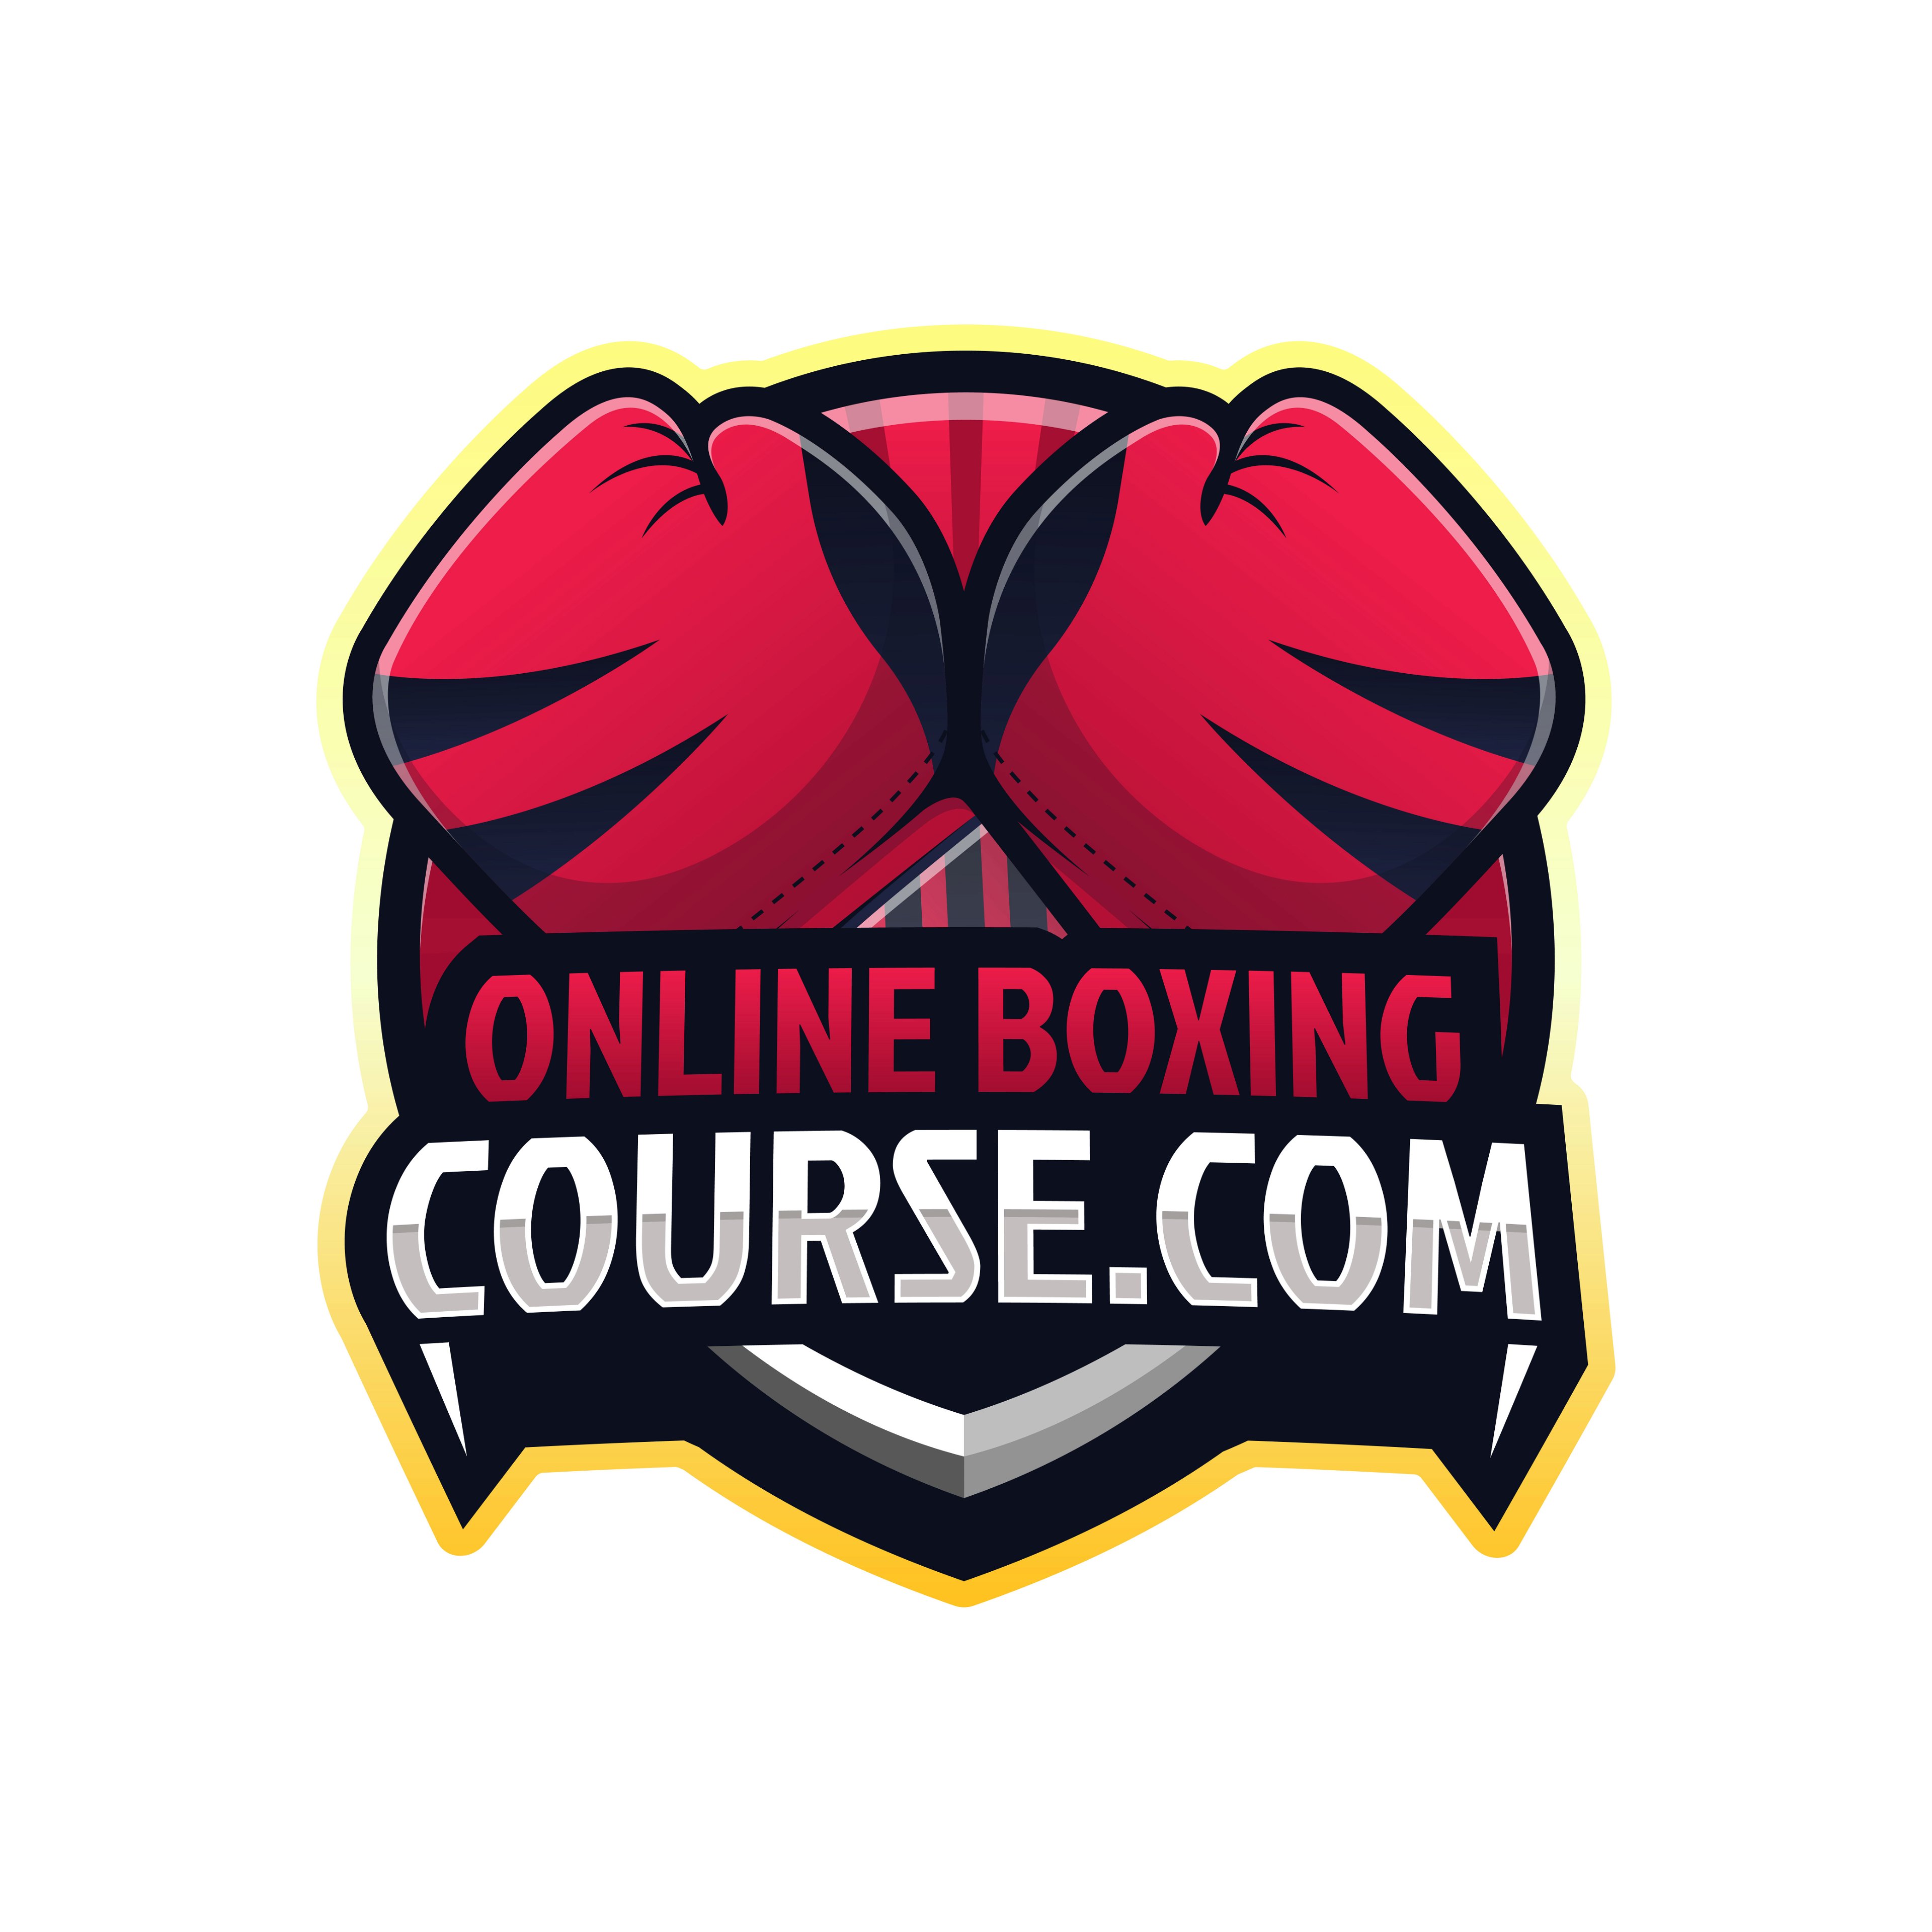 Online Boxing Course logo